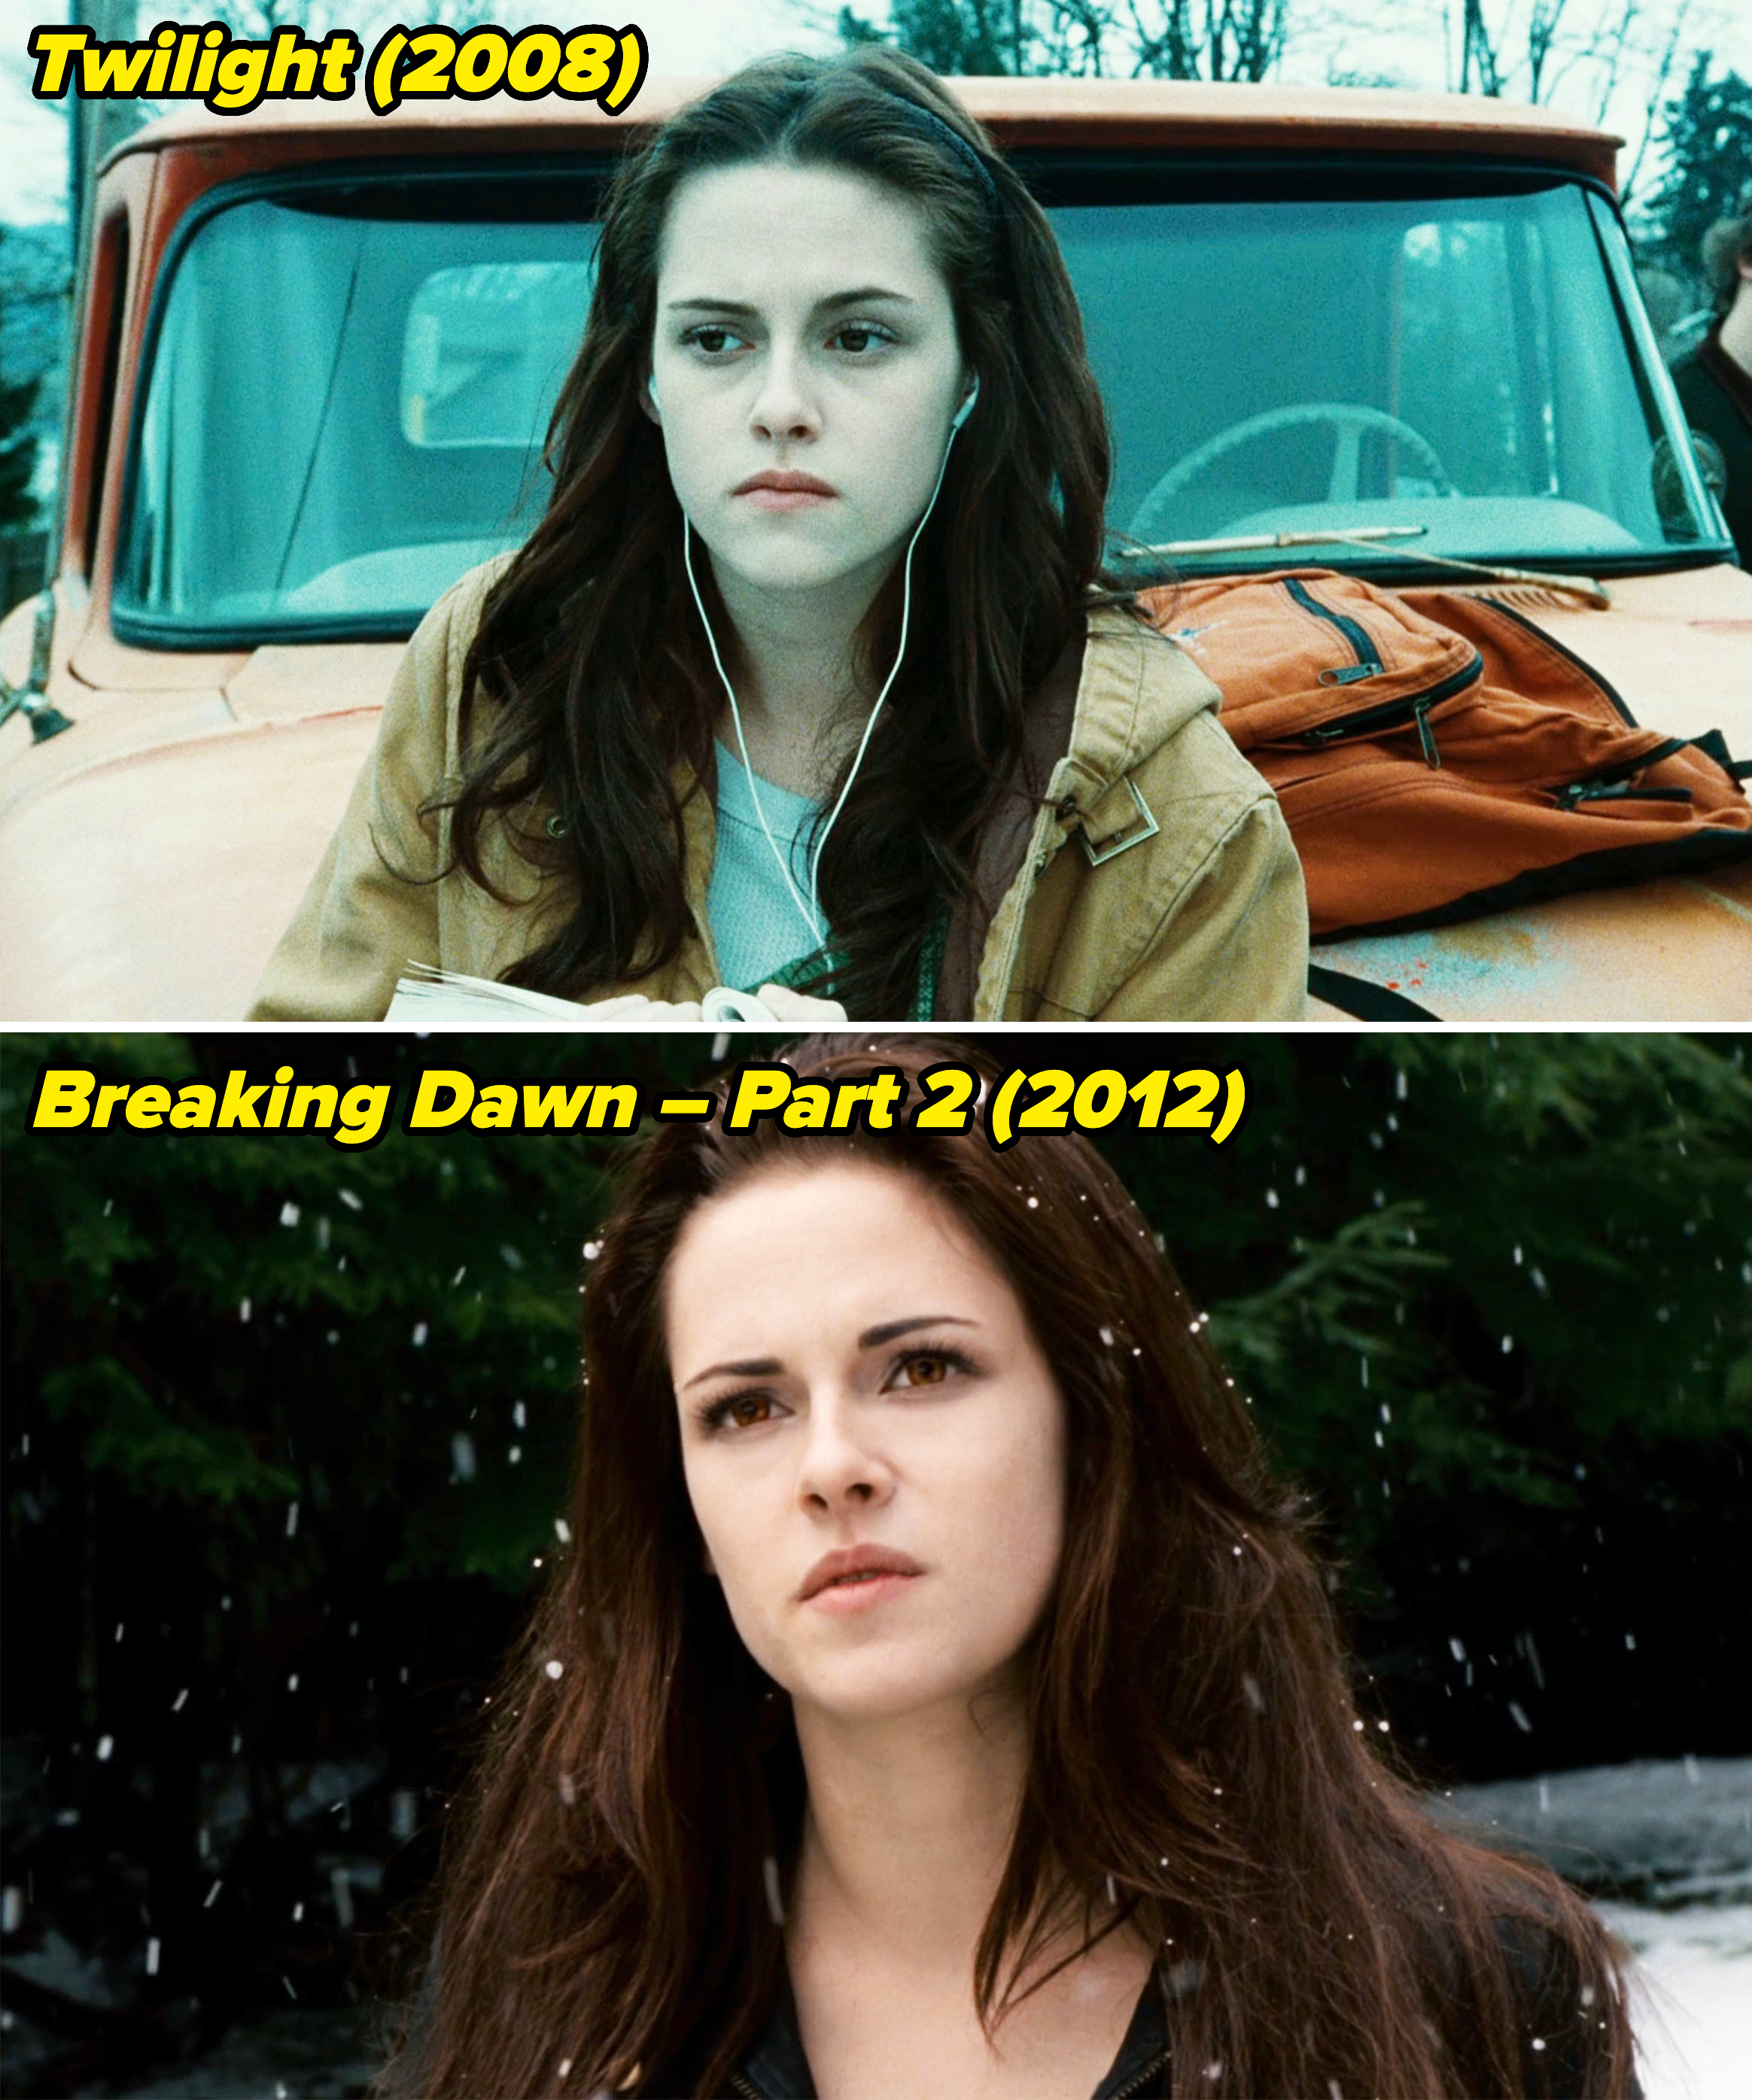 closeup of her in the first film in 2008 and the last film in 2012